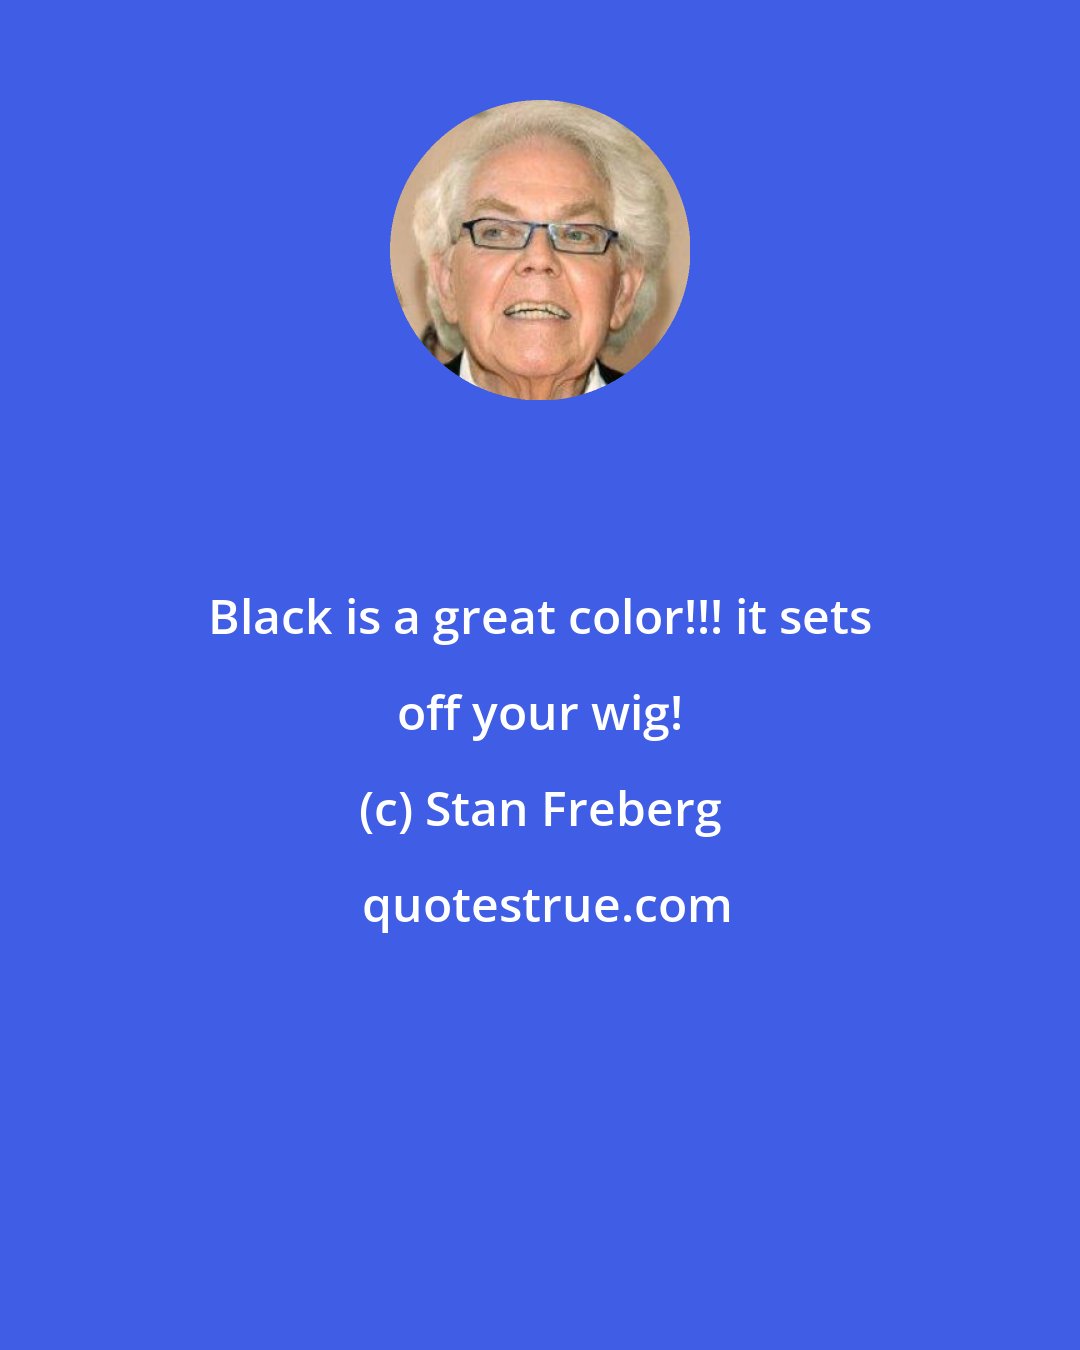 Stan Freberg: Black is a great color!!! it sets off your wig!